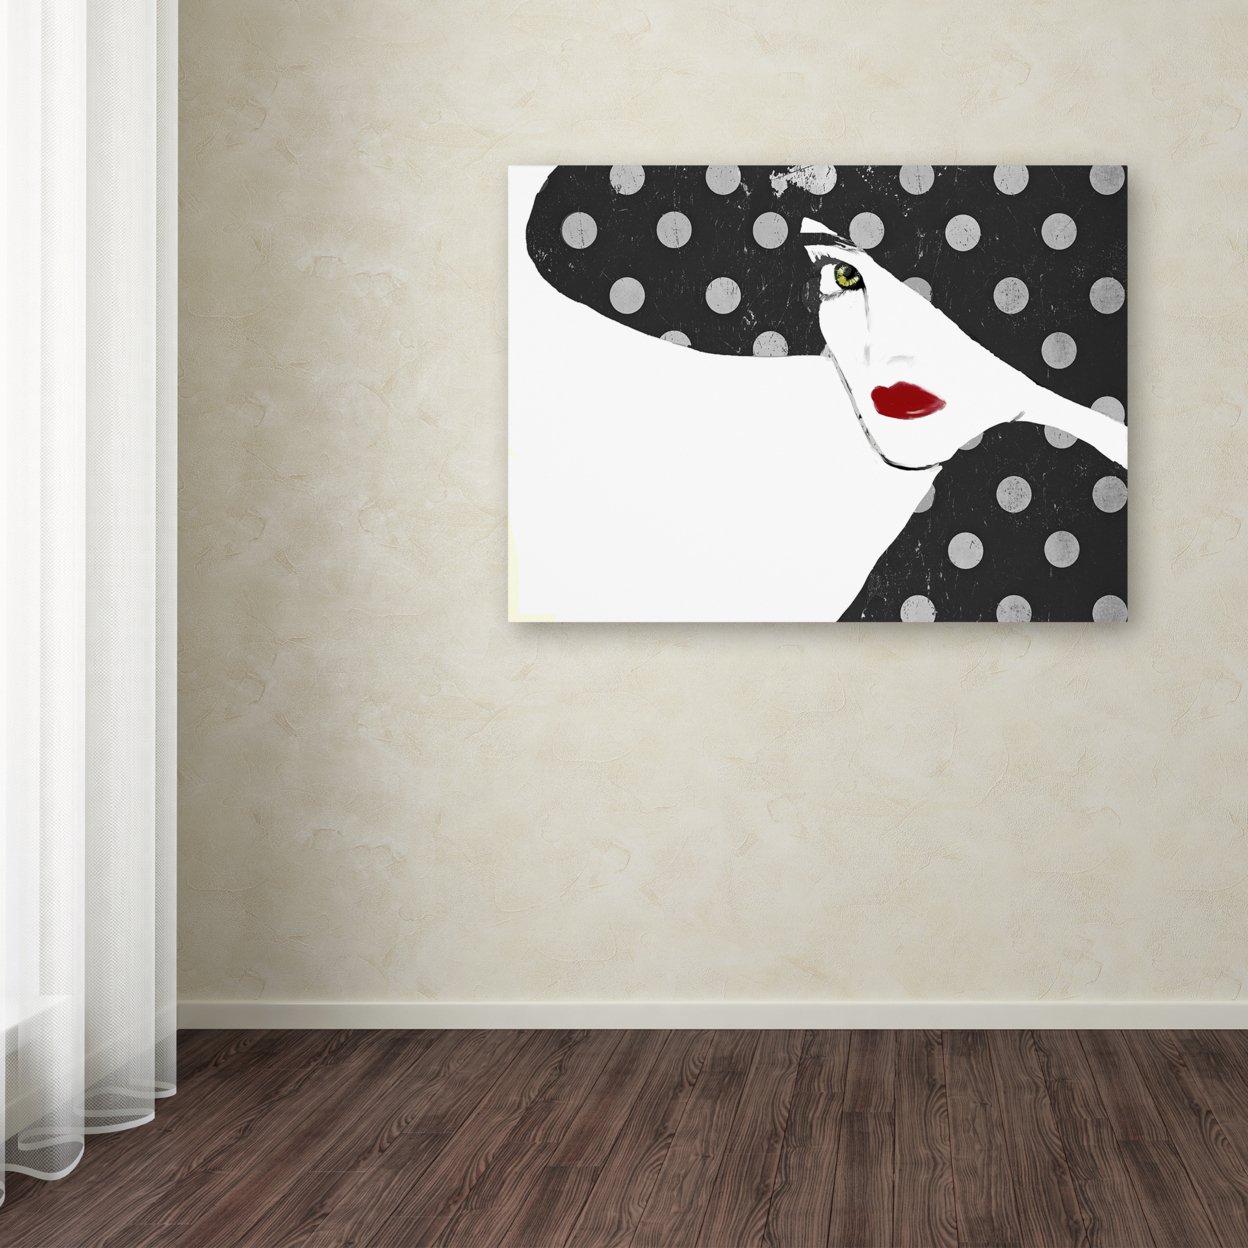 Color Bakery 'Femme Den IV' Canvas Wall Art 35 X 47 Inches